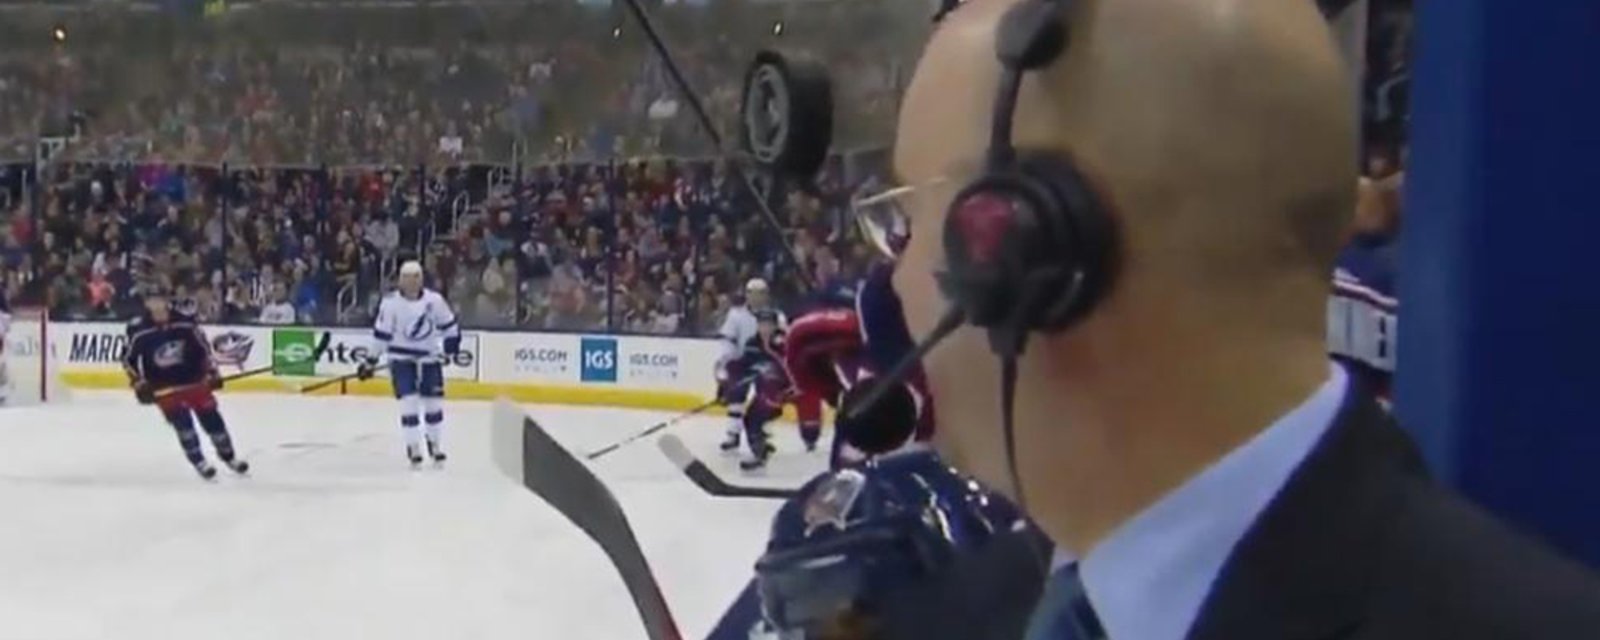 Pierre McGuire narrowly avoids puck to the face in Lightning vs Blue Jackets game